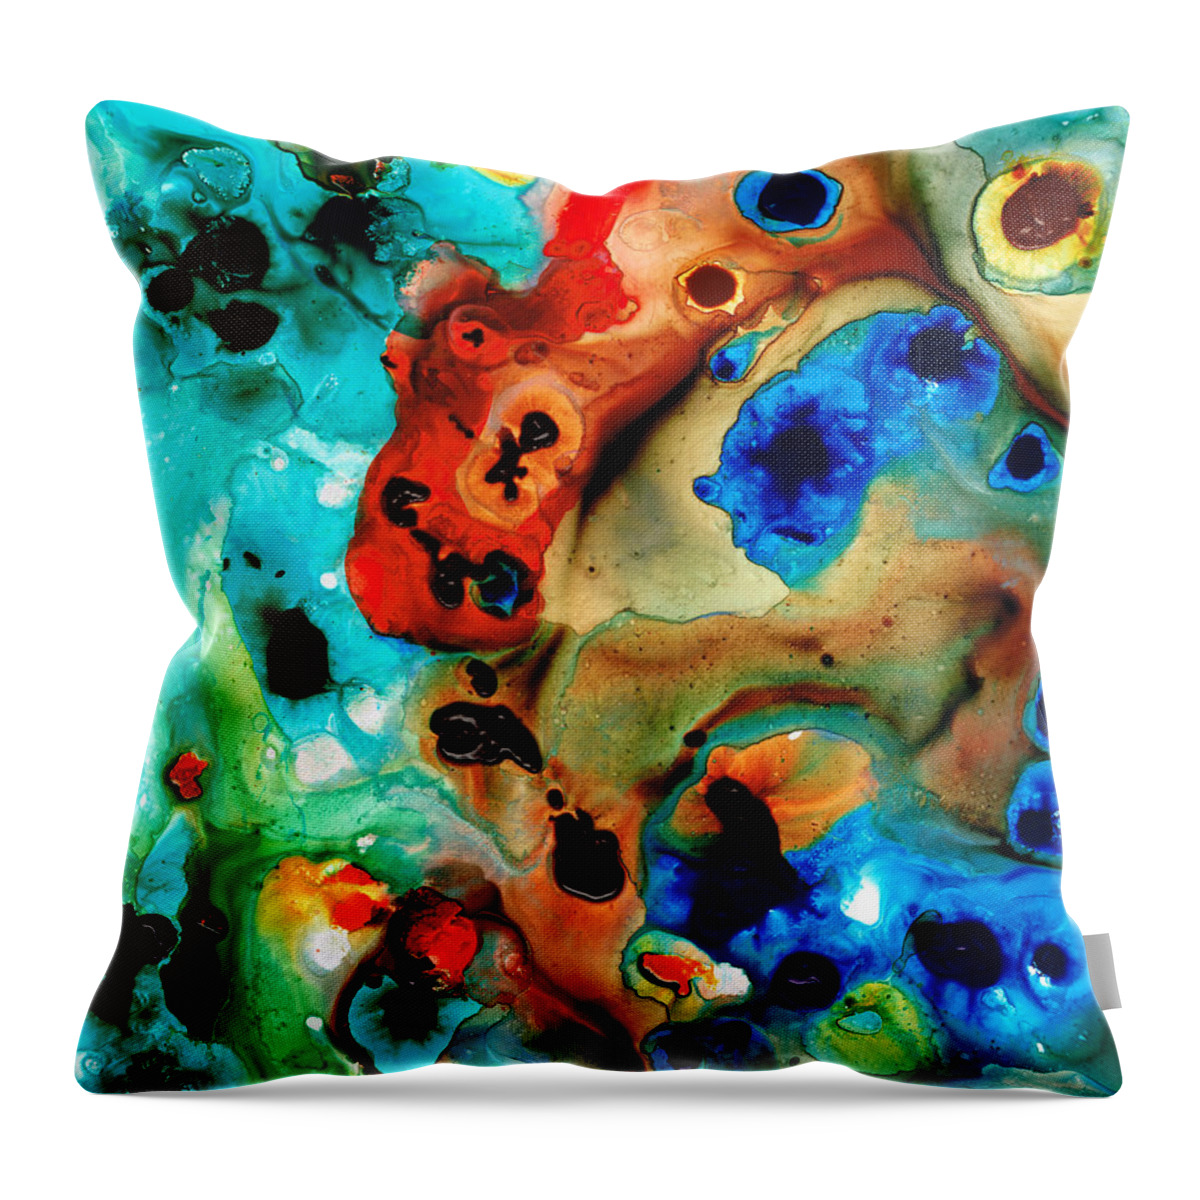 Abstract Art Throw Pillow featuring the painting Abstract 4 - Abstract Art By Sharon Cummings by Sharon Cummings